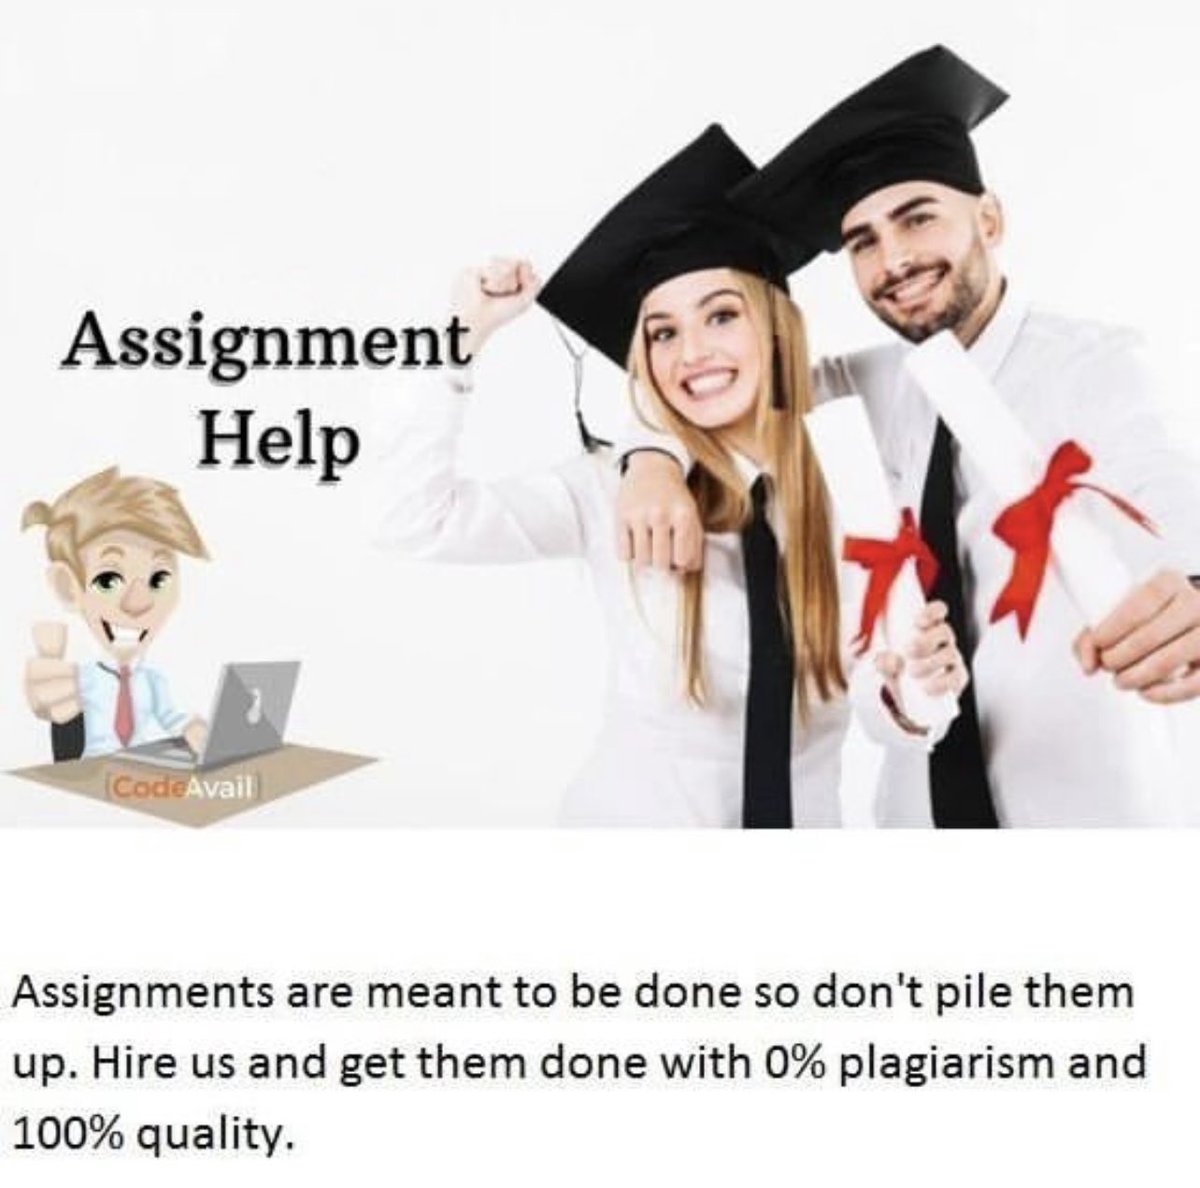 Which assignment is stressing you rn?  
Hit me up. My dms are open

#assignmenthelp#assignmnetdue #essayhelp #essaydue #academicwriting #accademicwritingassignments #statistics #statisticsclass #statisticsclass #mathproblems #nursing #schoolmemes #presentation